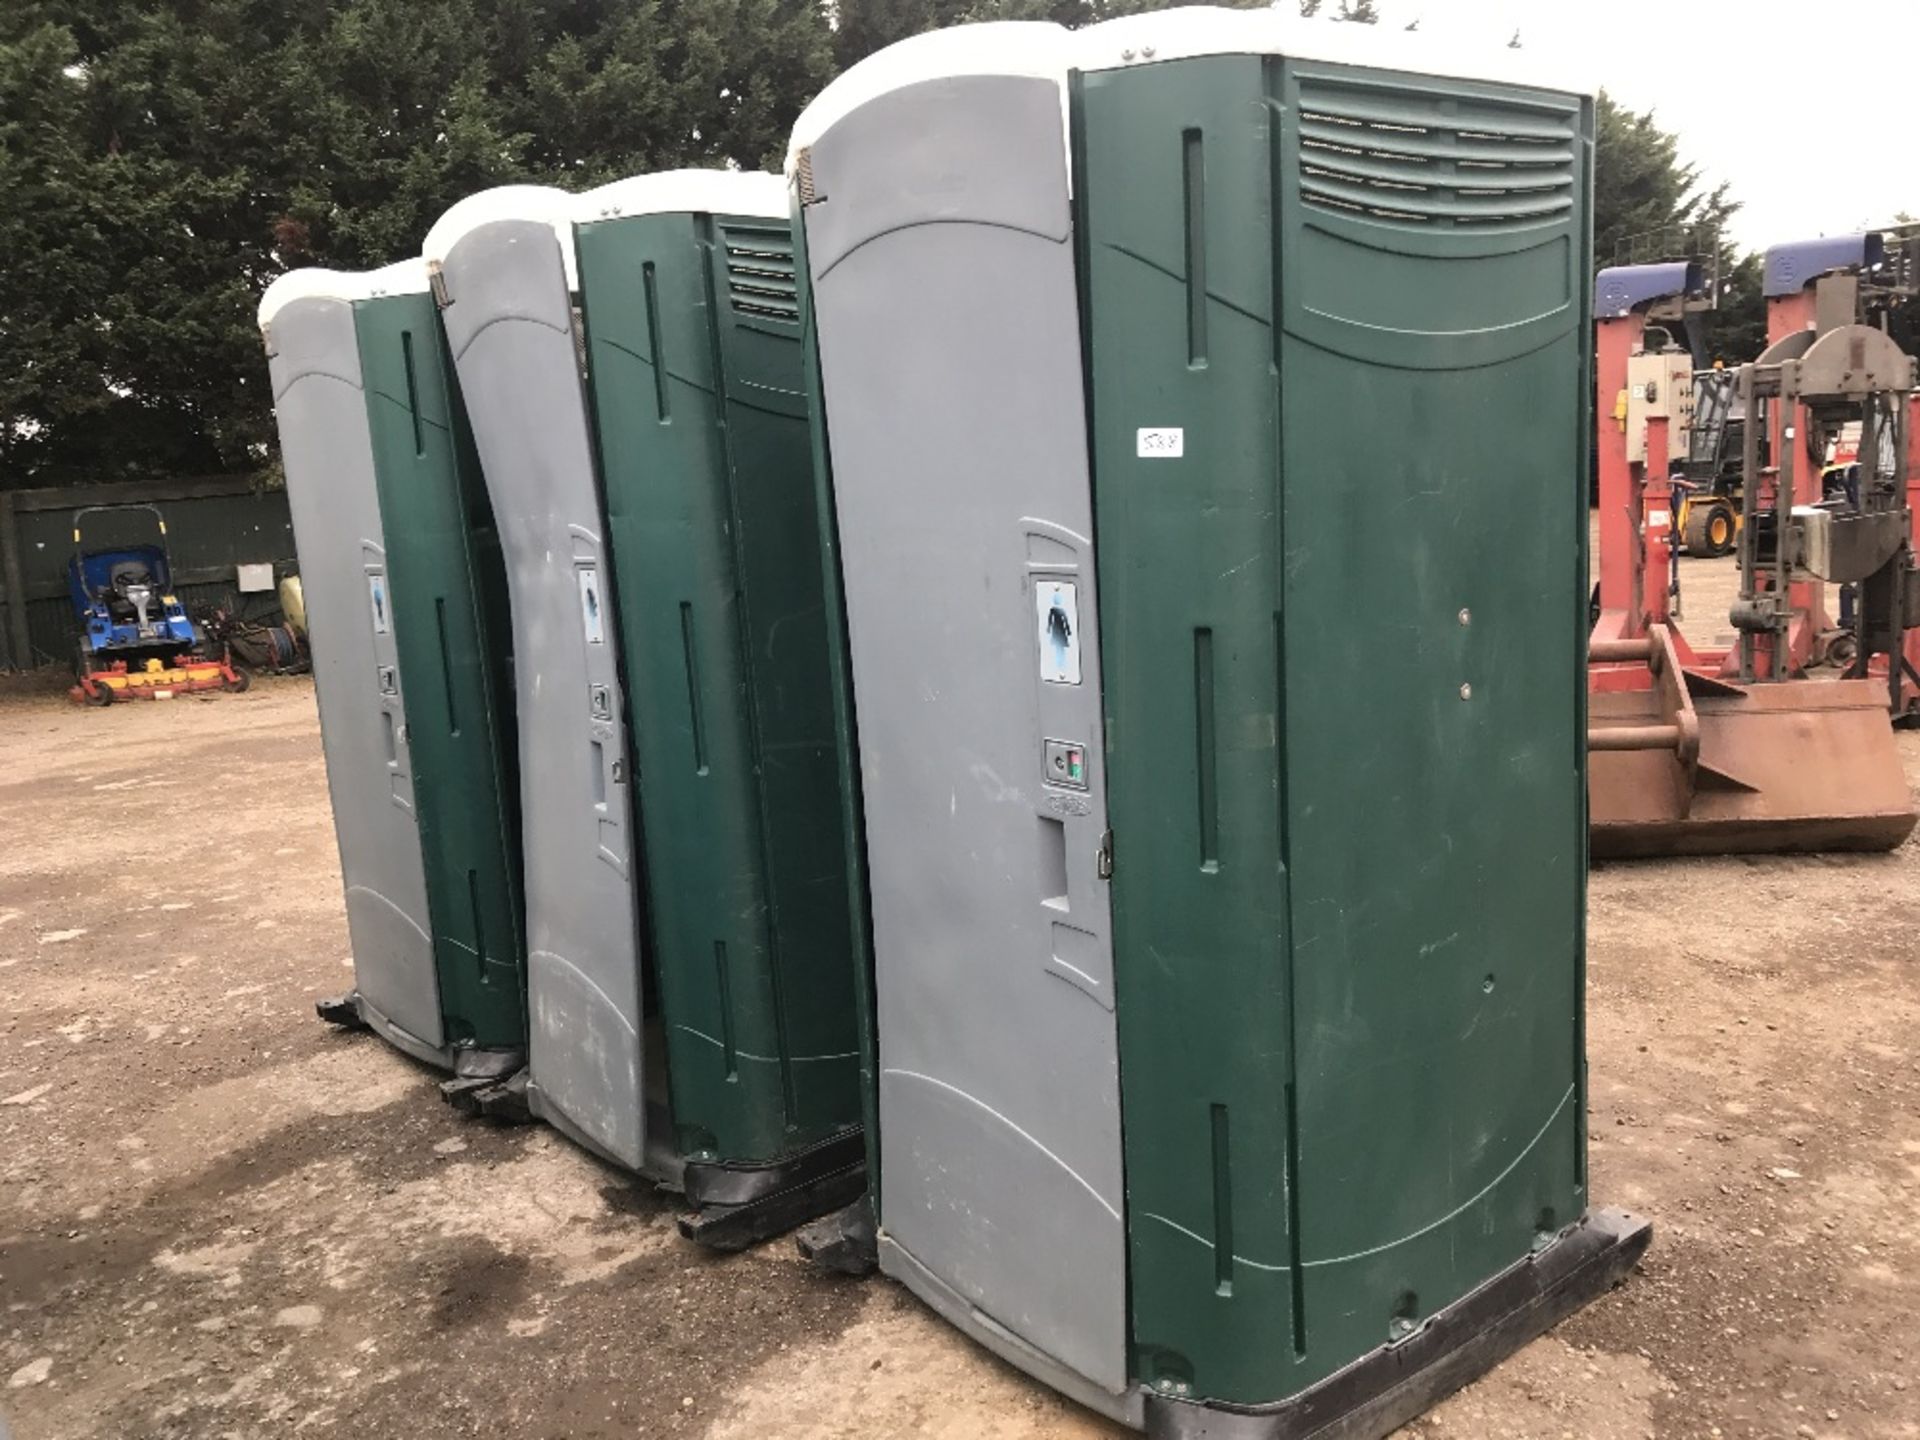 3 X GREEN PORTABLE TOILETS, ONE DOOR NEEDS ATTENTION...NB: 3 TOILETS SOLD AS ONE LOT